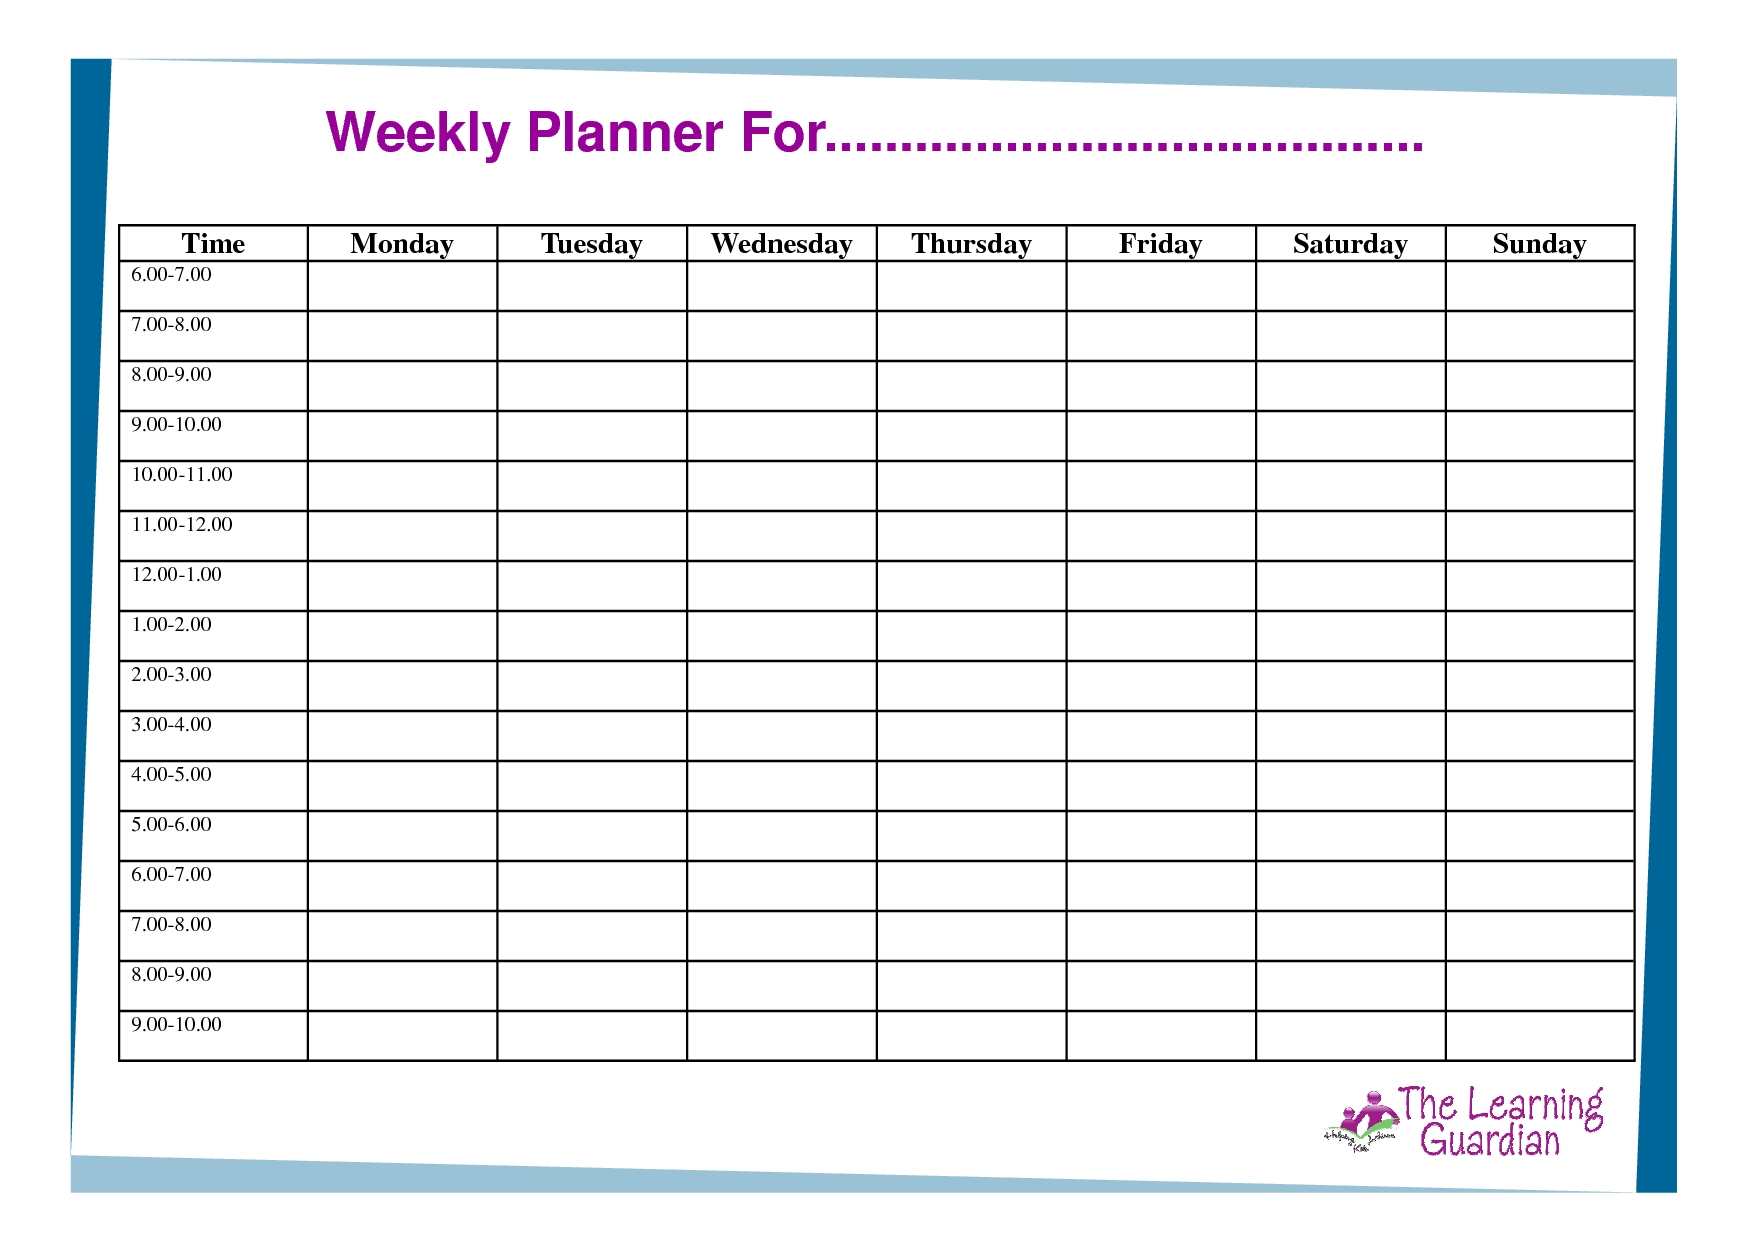 Free Printable Weekly Calendar Templates | Weekly Planner For Time pertaining to Printable Weekly Calendar Monday Start